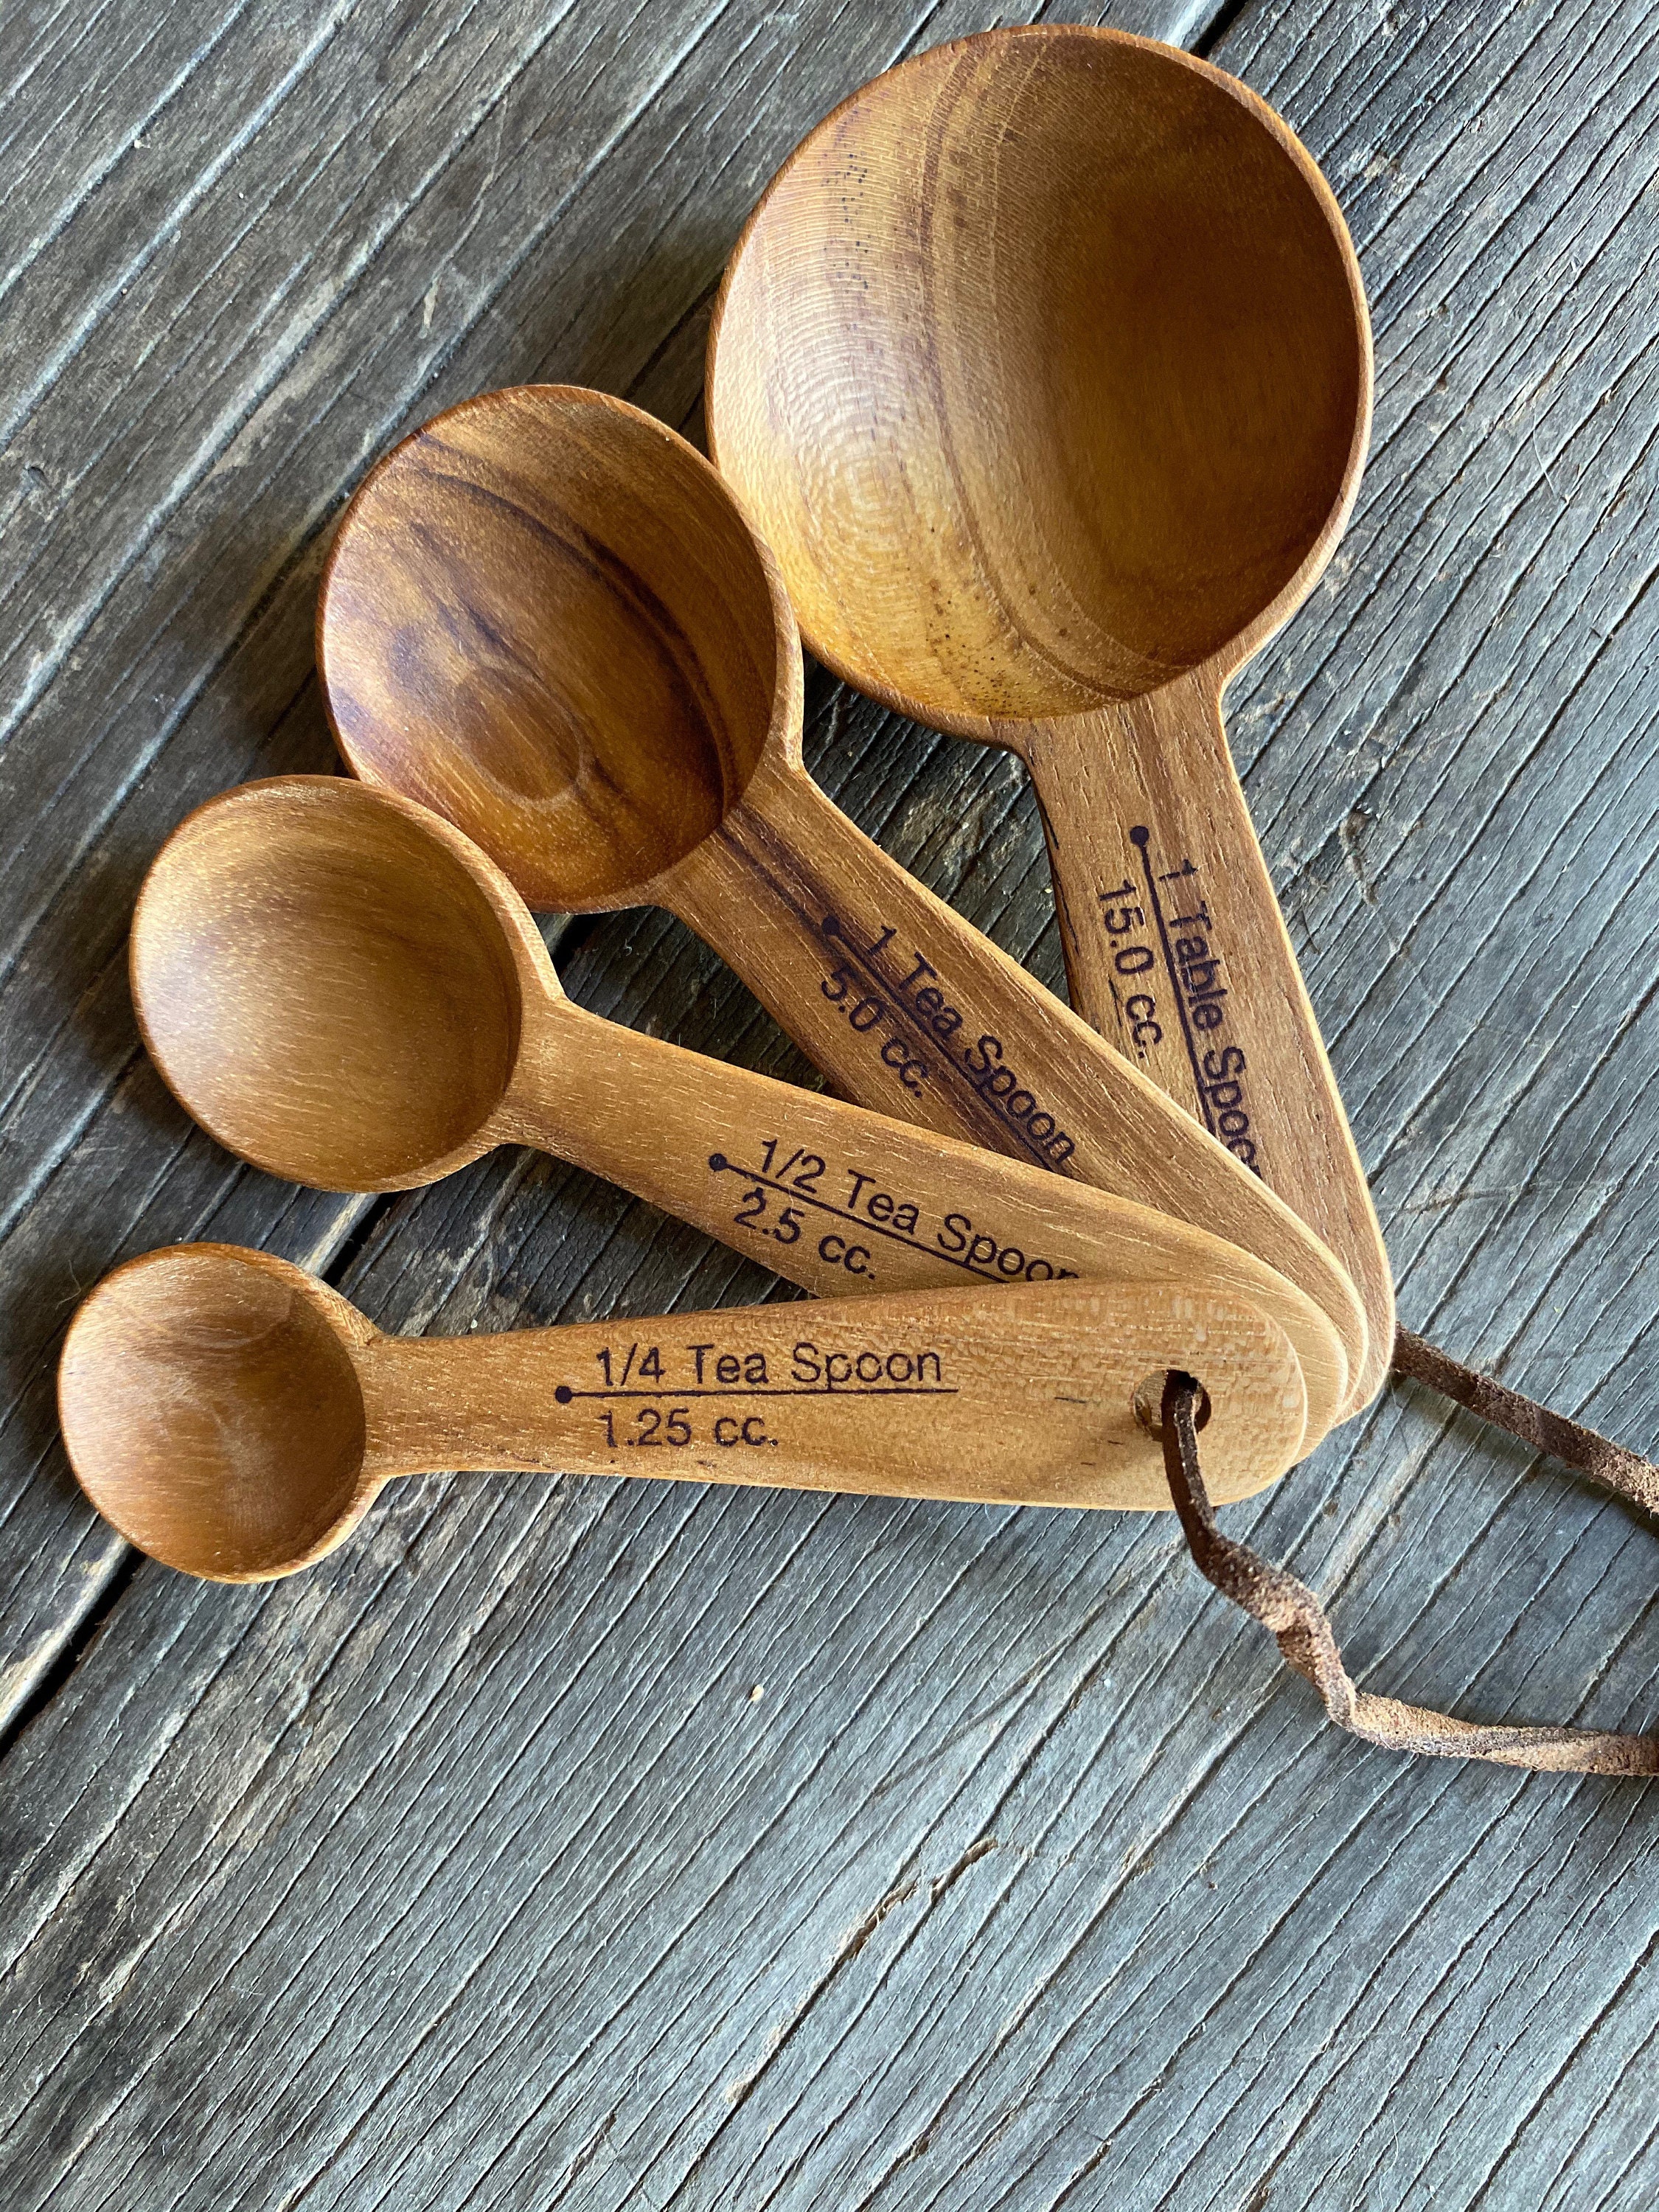 Long Handle Wooden Measuring Spoons by utensi, Set of 4 Engraved Accurate  Spoons for Dry and Liquid Ingredients, Beech Wood Set (9-inch handles)